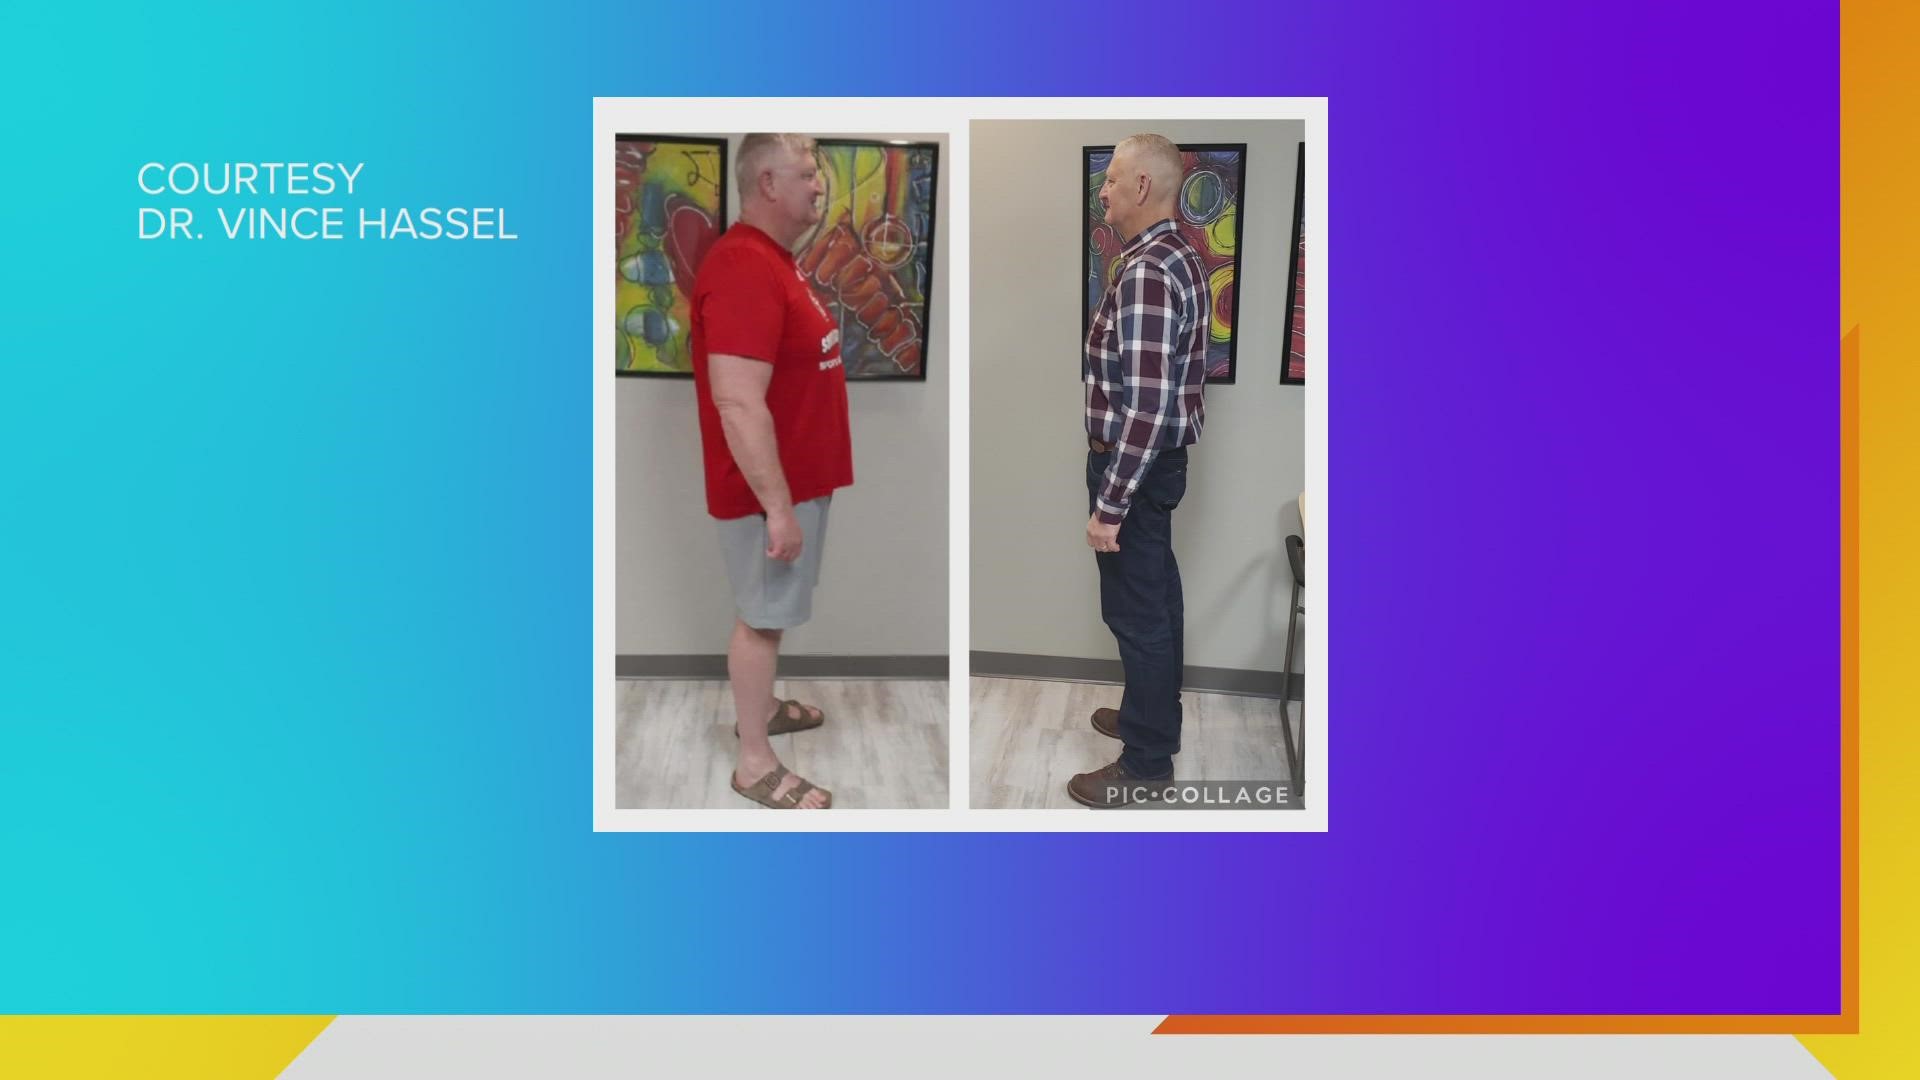 Chad Sheley has lost MORE that 101 pounds since starting Dr. Vince Hassel's ChiroThin Weight Loss program in April 2022 says "it was easy!" | Paid Content